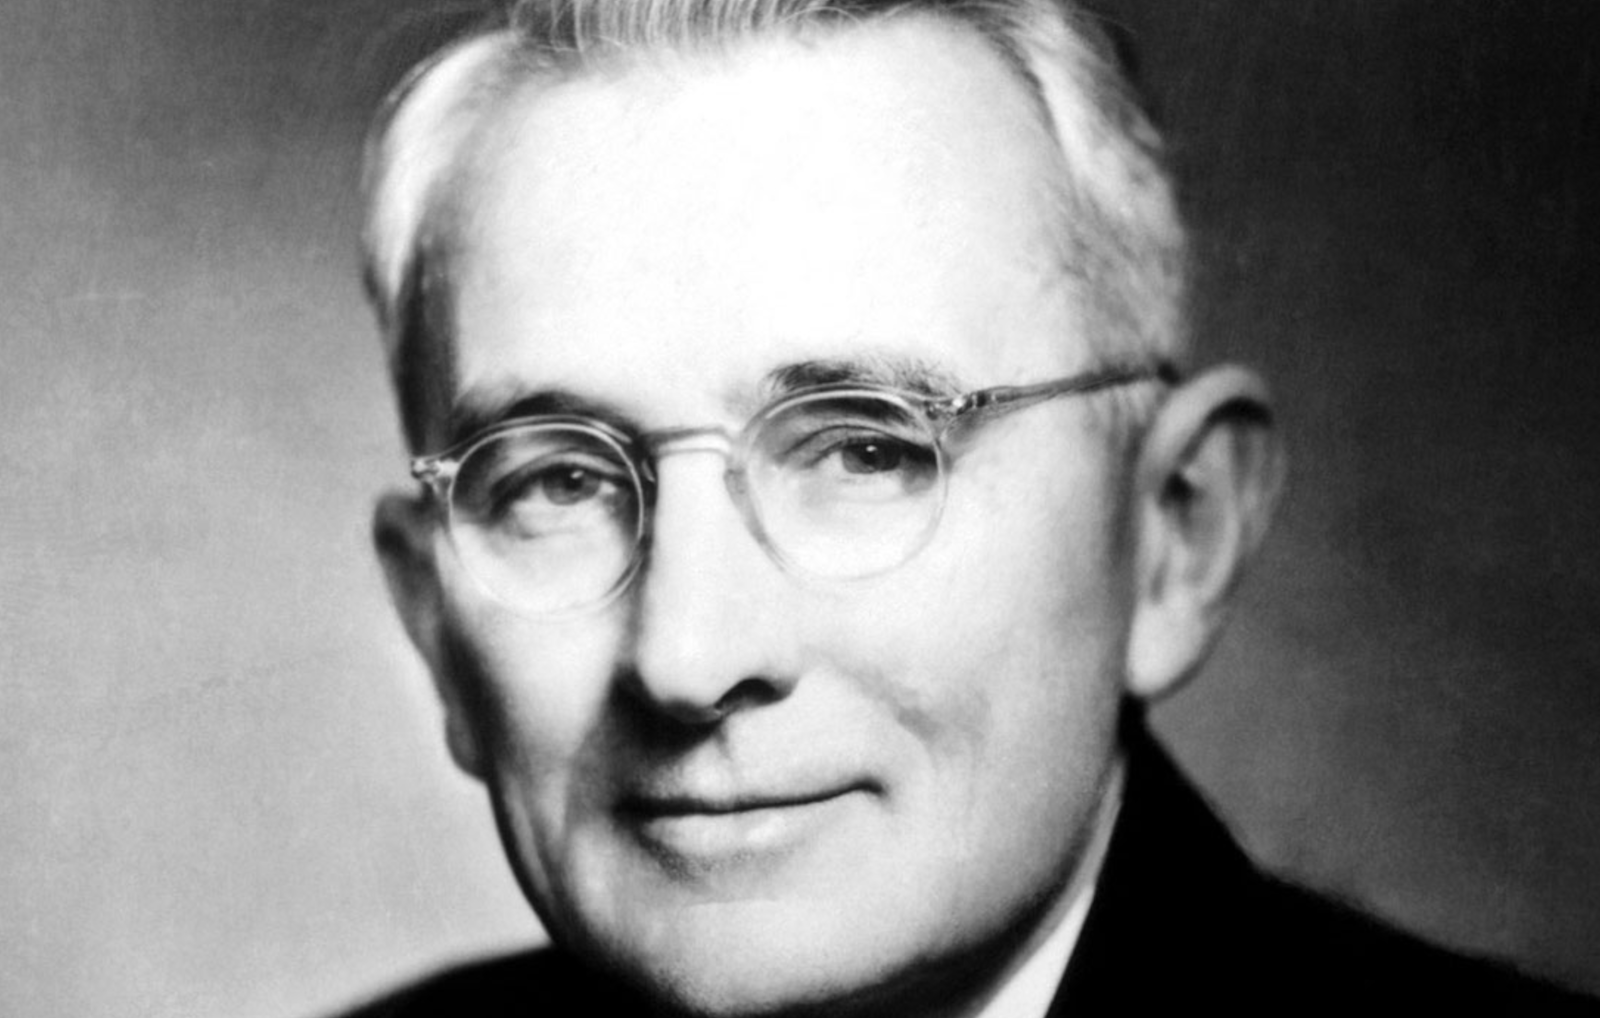 Dale Carnegie: Influence and Success — Bin Day Blues